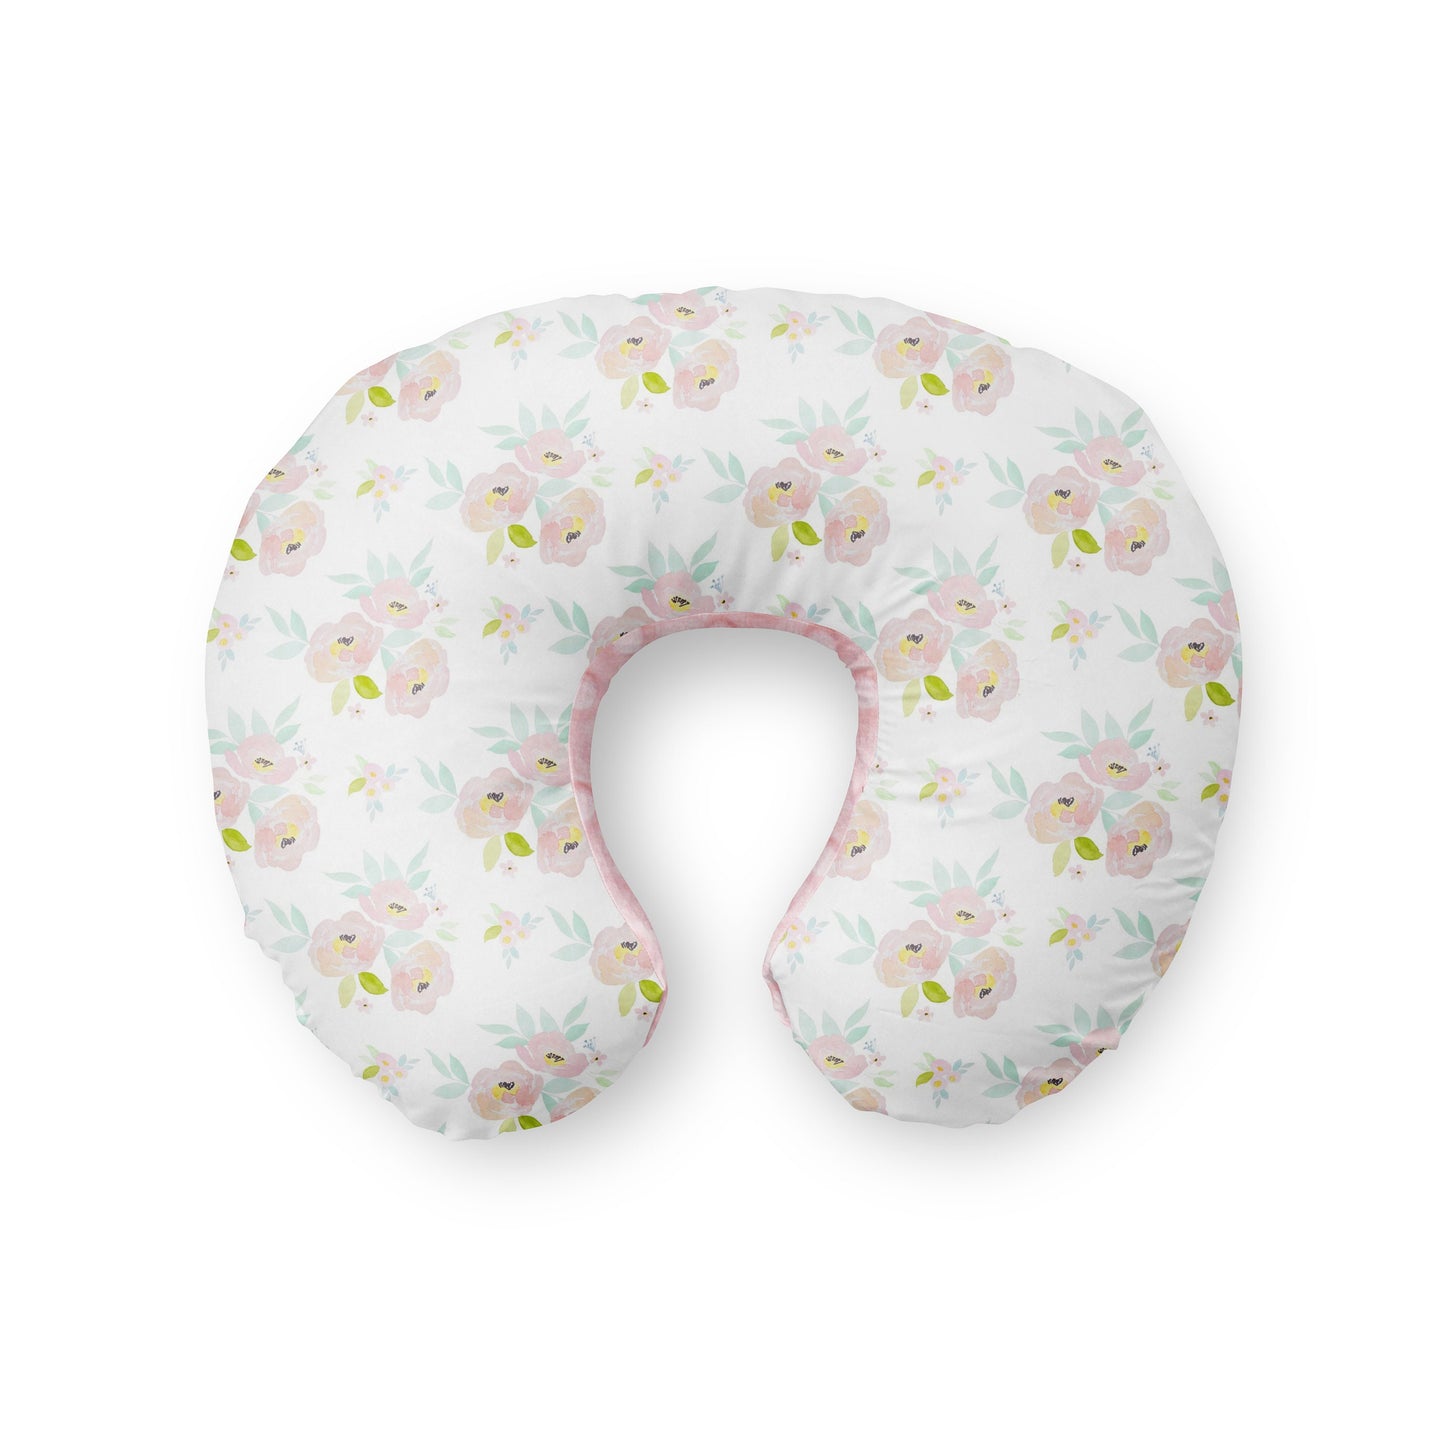 Nursing pillow cover. Blush Roses Floral pale pink minky